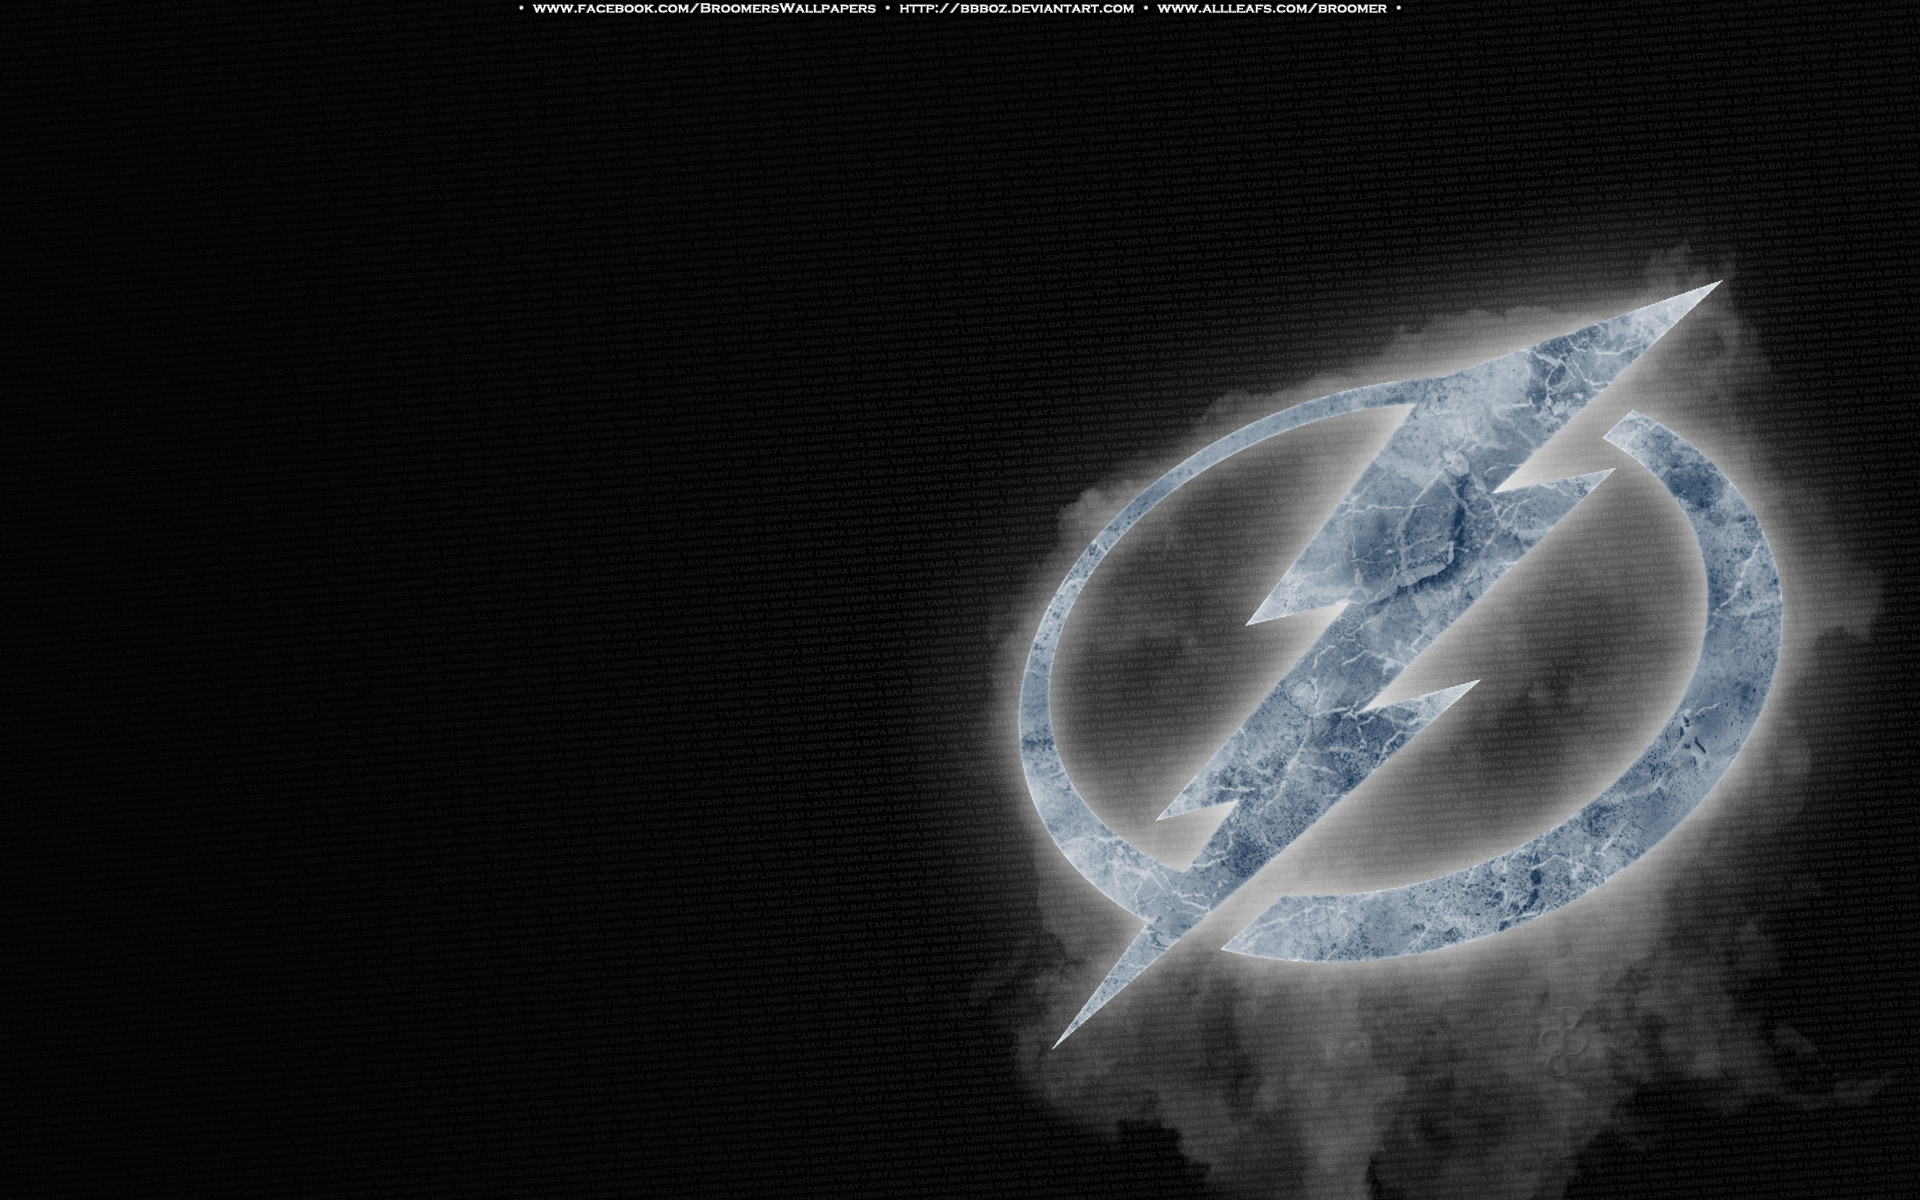 tampa bay lightning ice by bbboz fan art wallpaper other 2011 2015 1920x1200